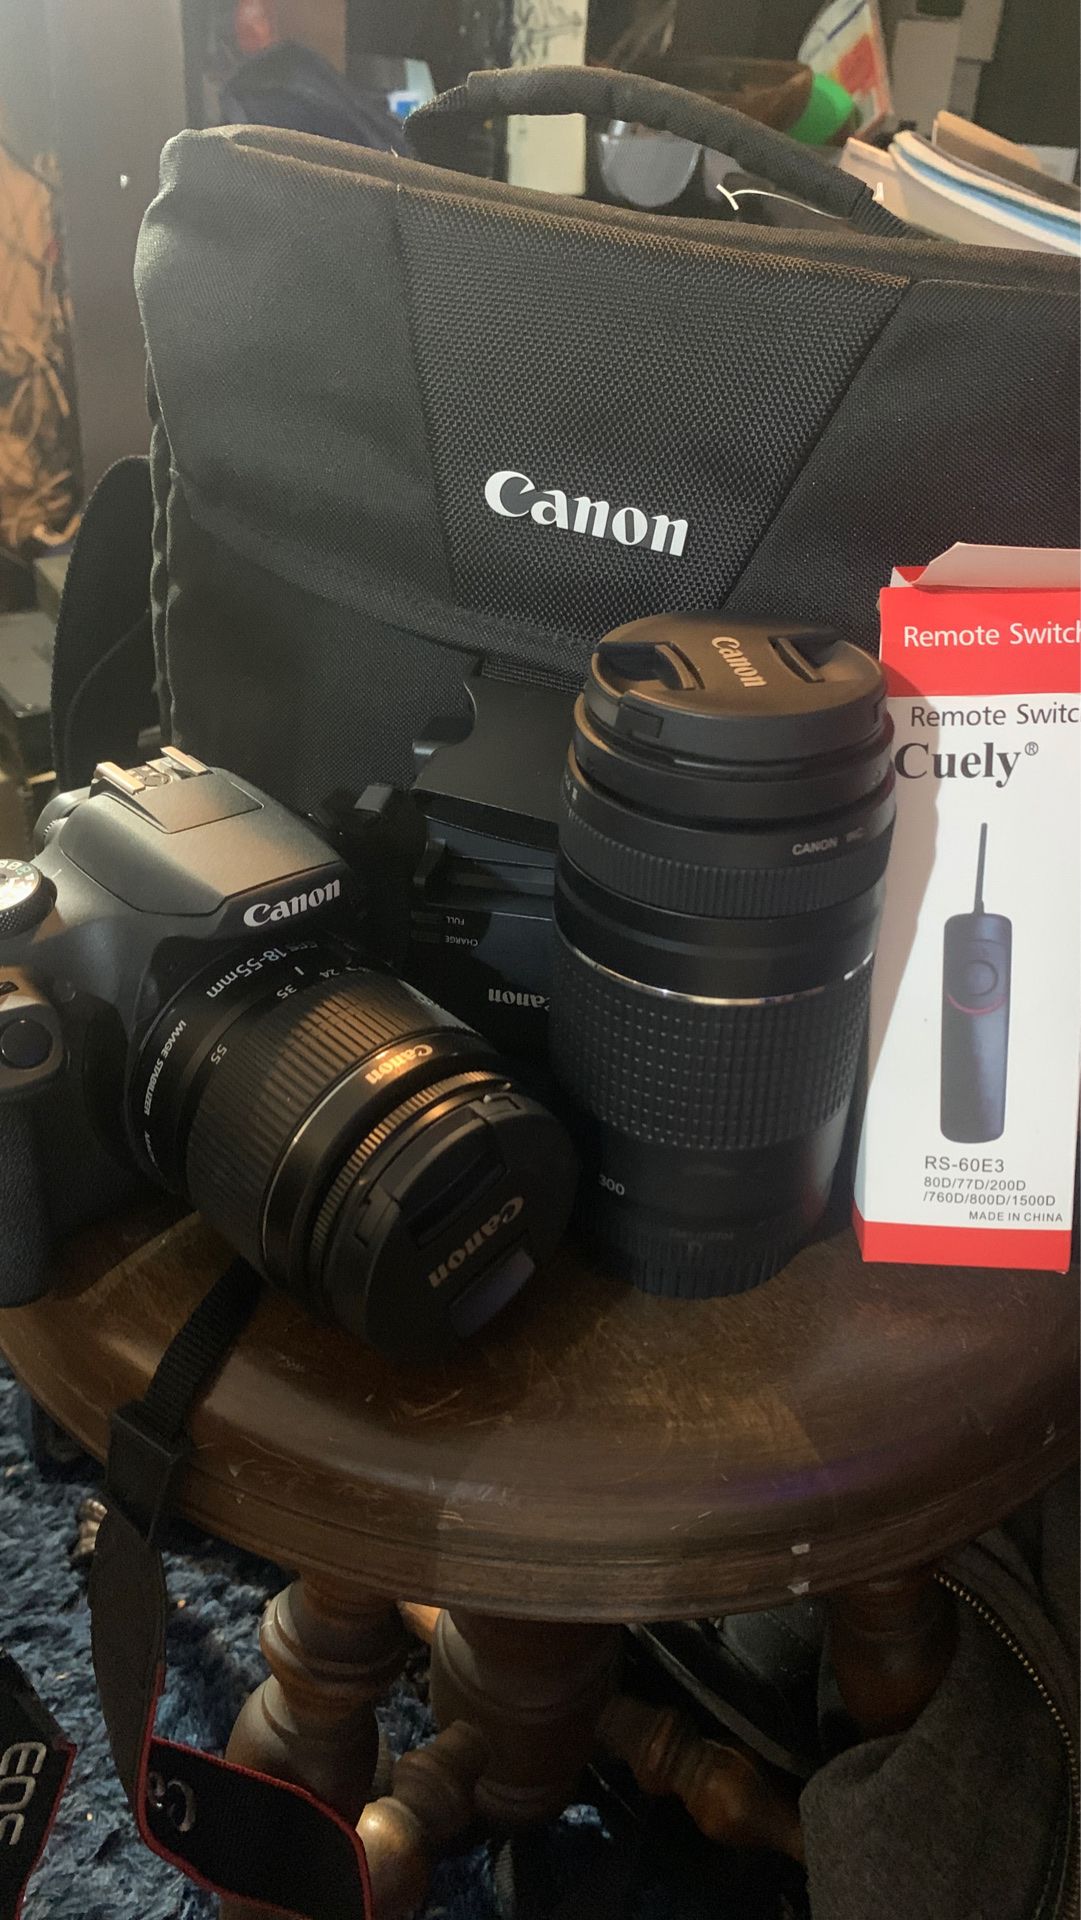 Canon ds126741 eos rebel t7 for sale or trade for gaming pc